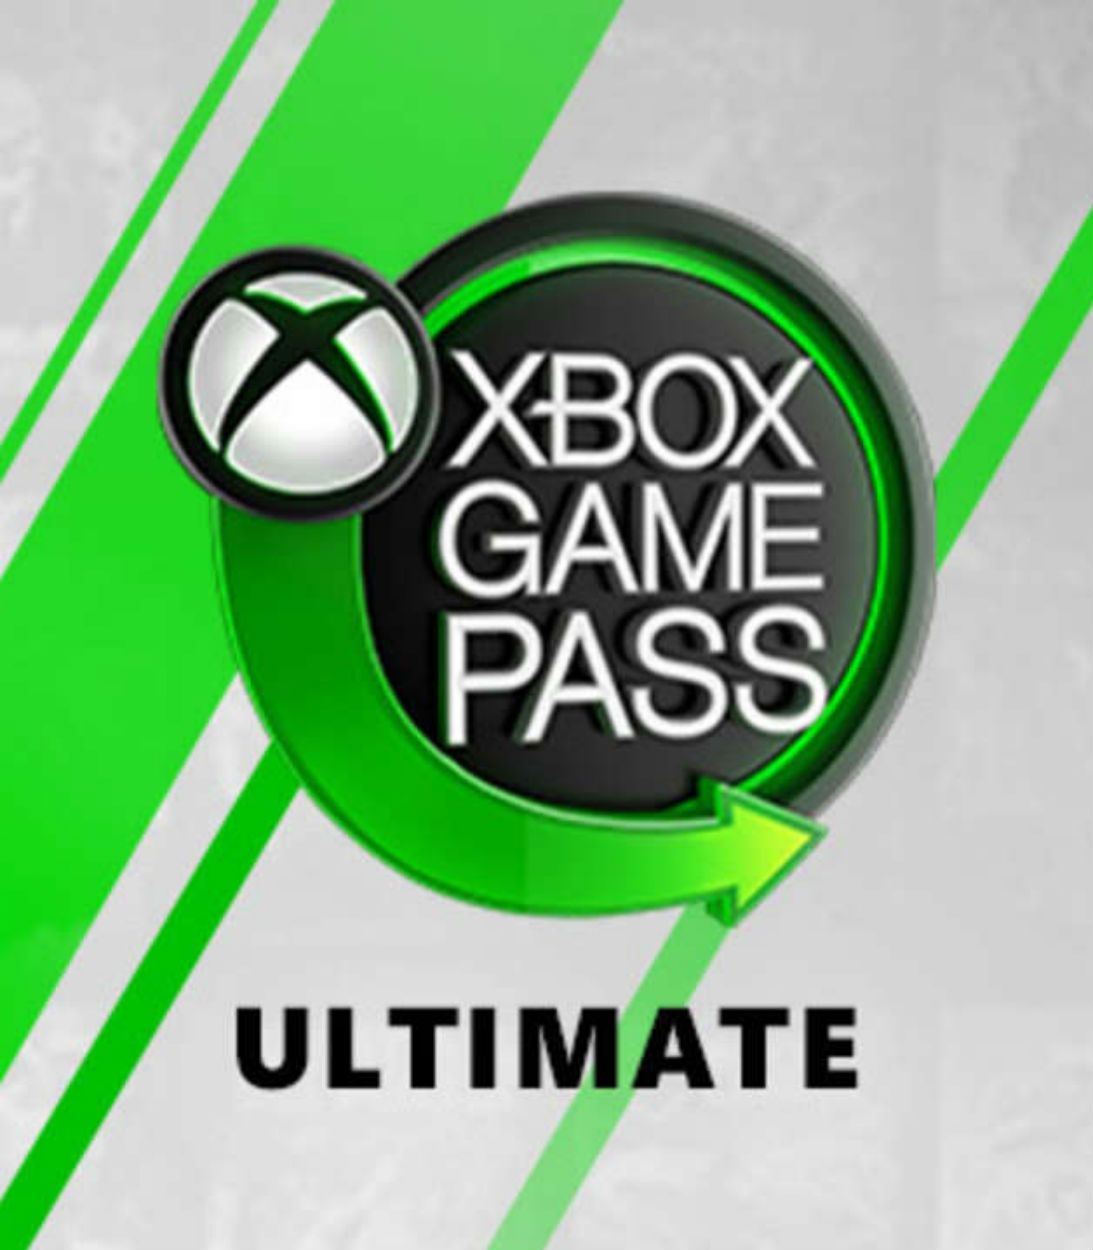 Xbox Game Pass Vertical